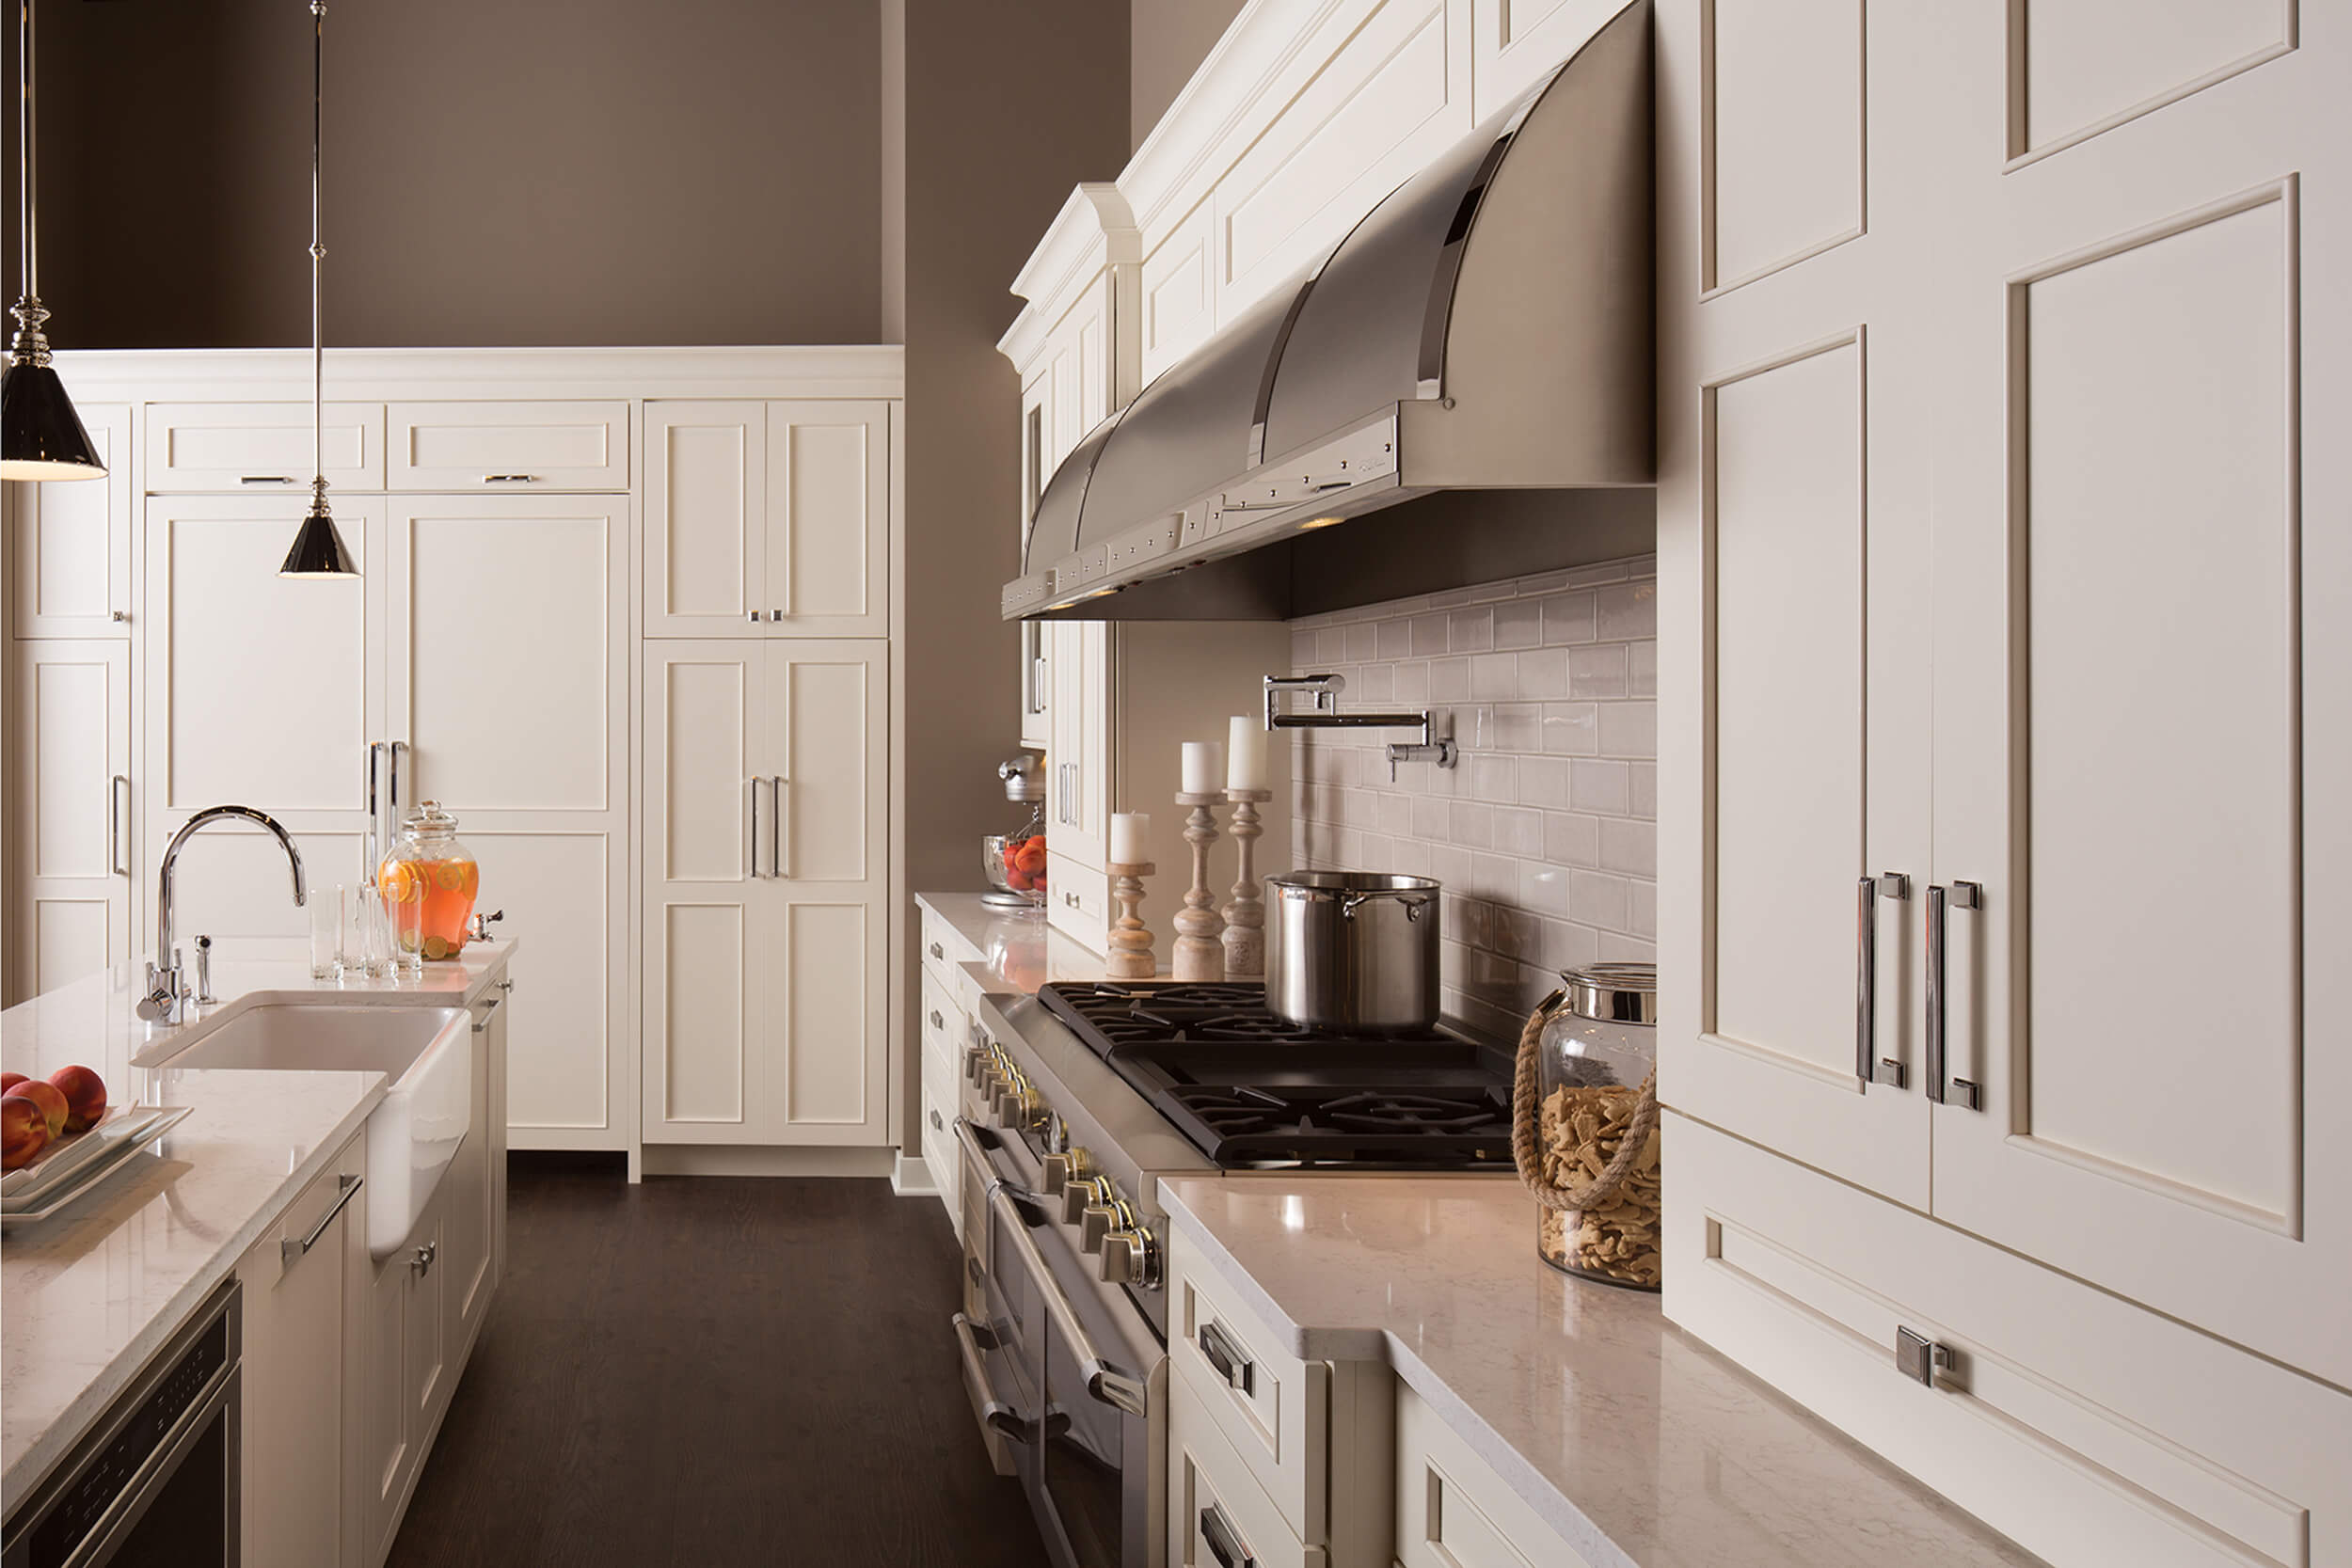 An casual styled kitchen with frameless kitchen cabinets with white and beige painted finishes.